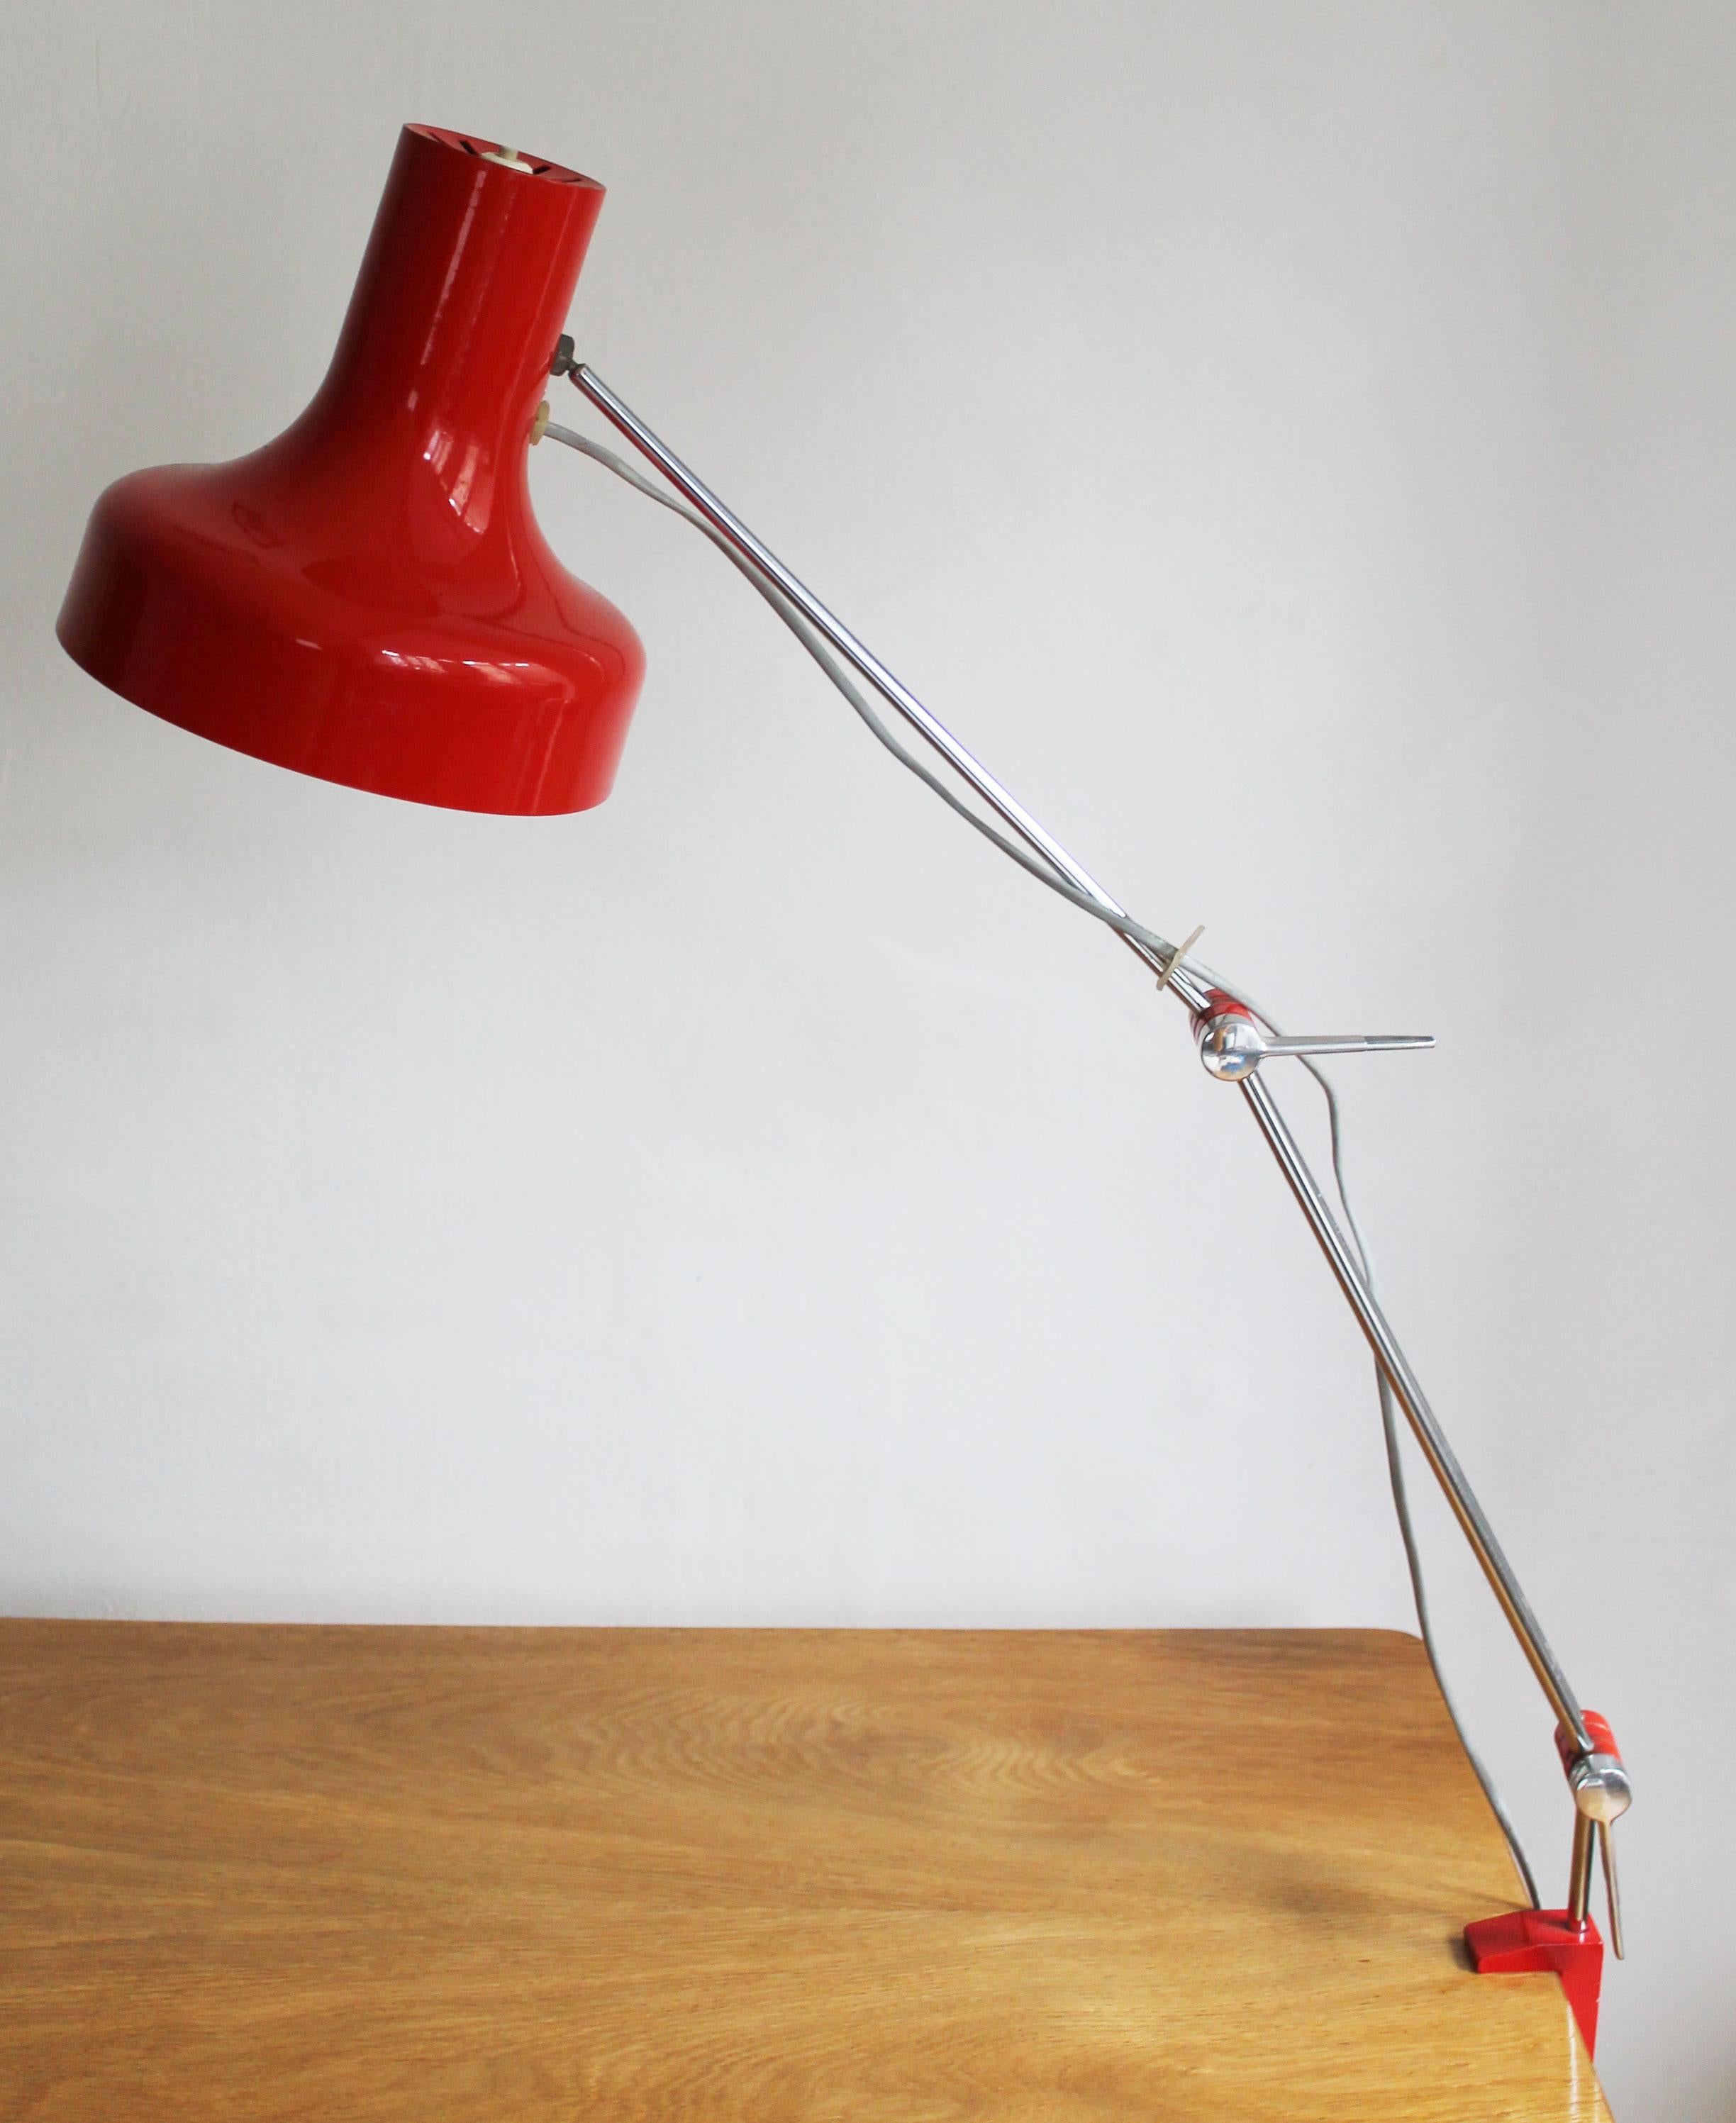 This bright red adjustable lamp was designed by Napako Lightning company in the 1960’s Czechoslovakia. It’s designer, Josef Hurka is considered by many as the most talented and commercially most successful Czech lighting designer of the second part